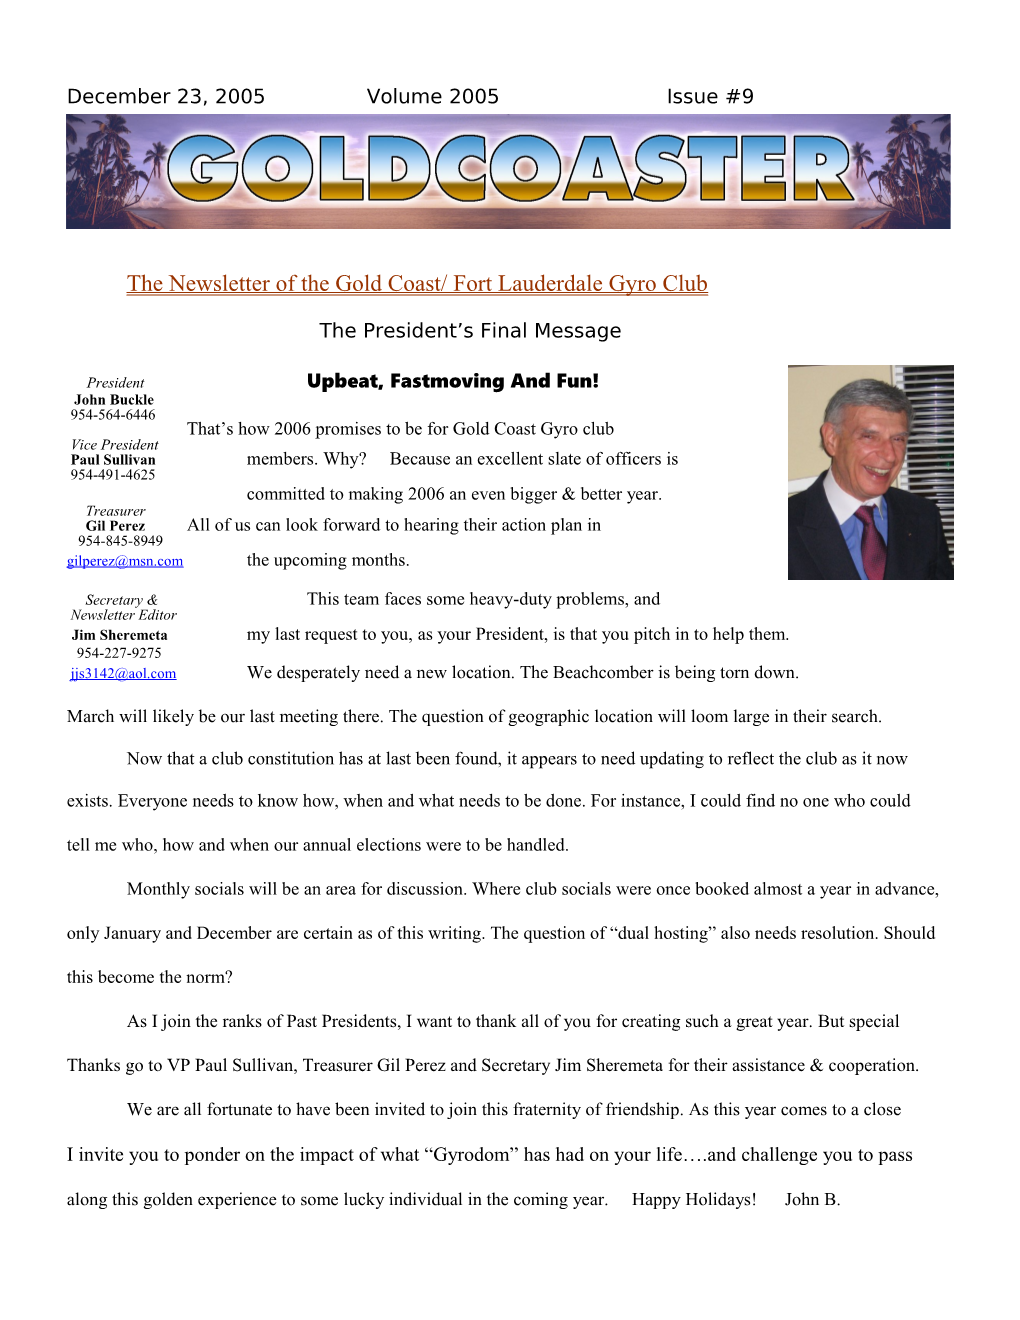 The Newsletter of the Gold Coast/ Fort Lauderdale Gyro Club